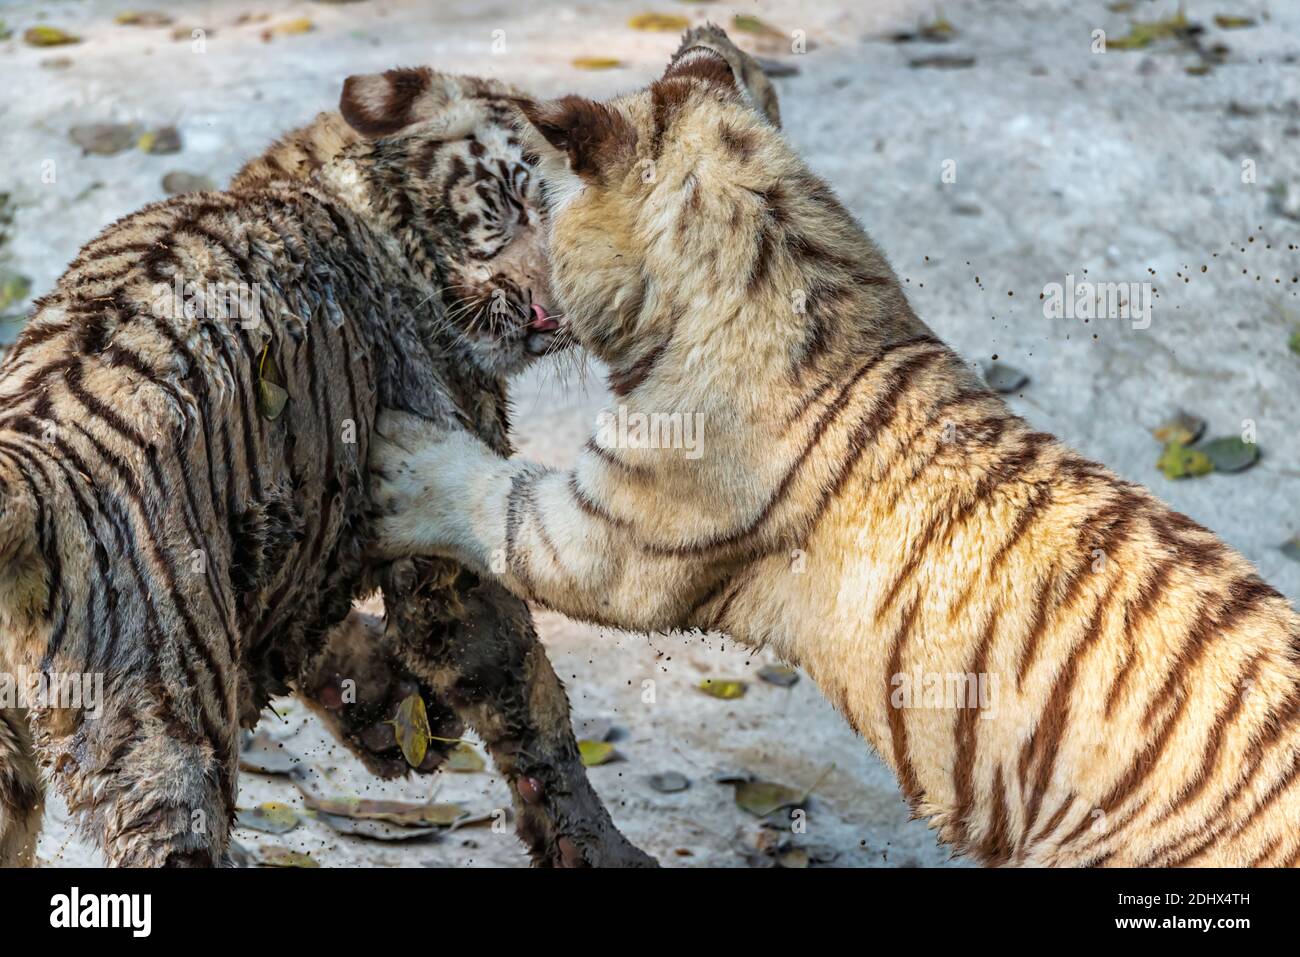 Two white Bengal tiger cubs playing with each other in the tiger enclosure at the National Zoological Park Delhi, also known as the Delhi Zoo. Stock Photo